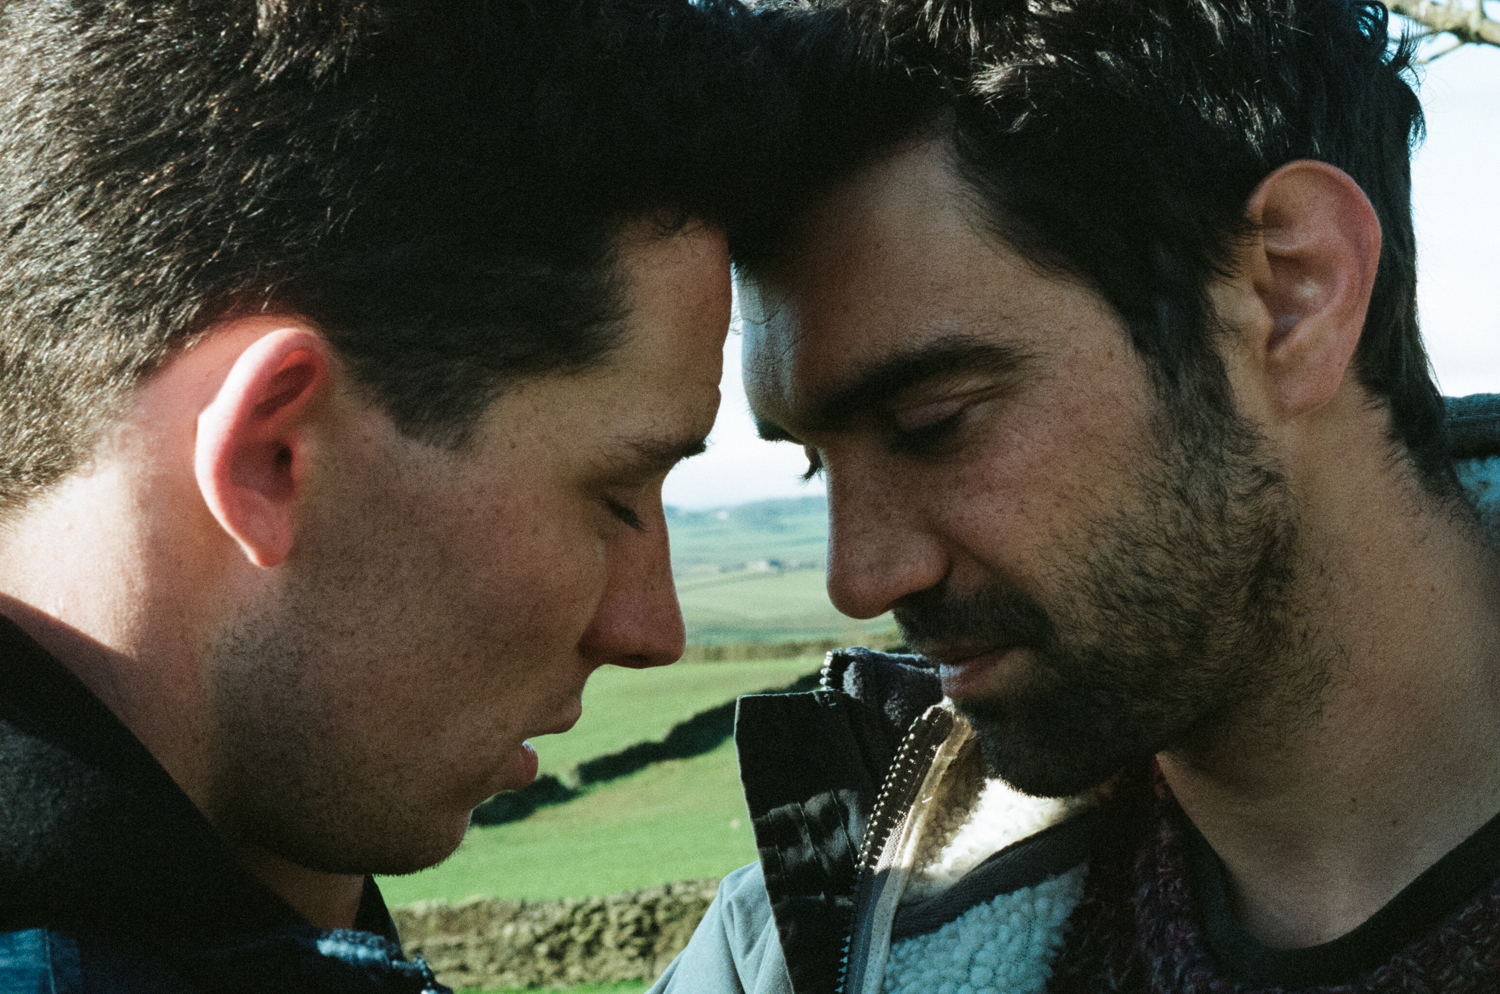 Win 1 of 20 double passes to see God’s Own Country